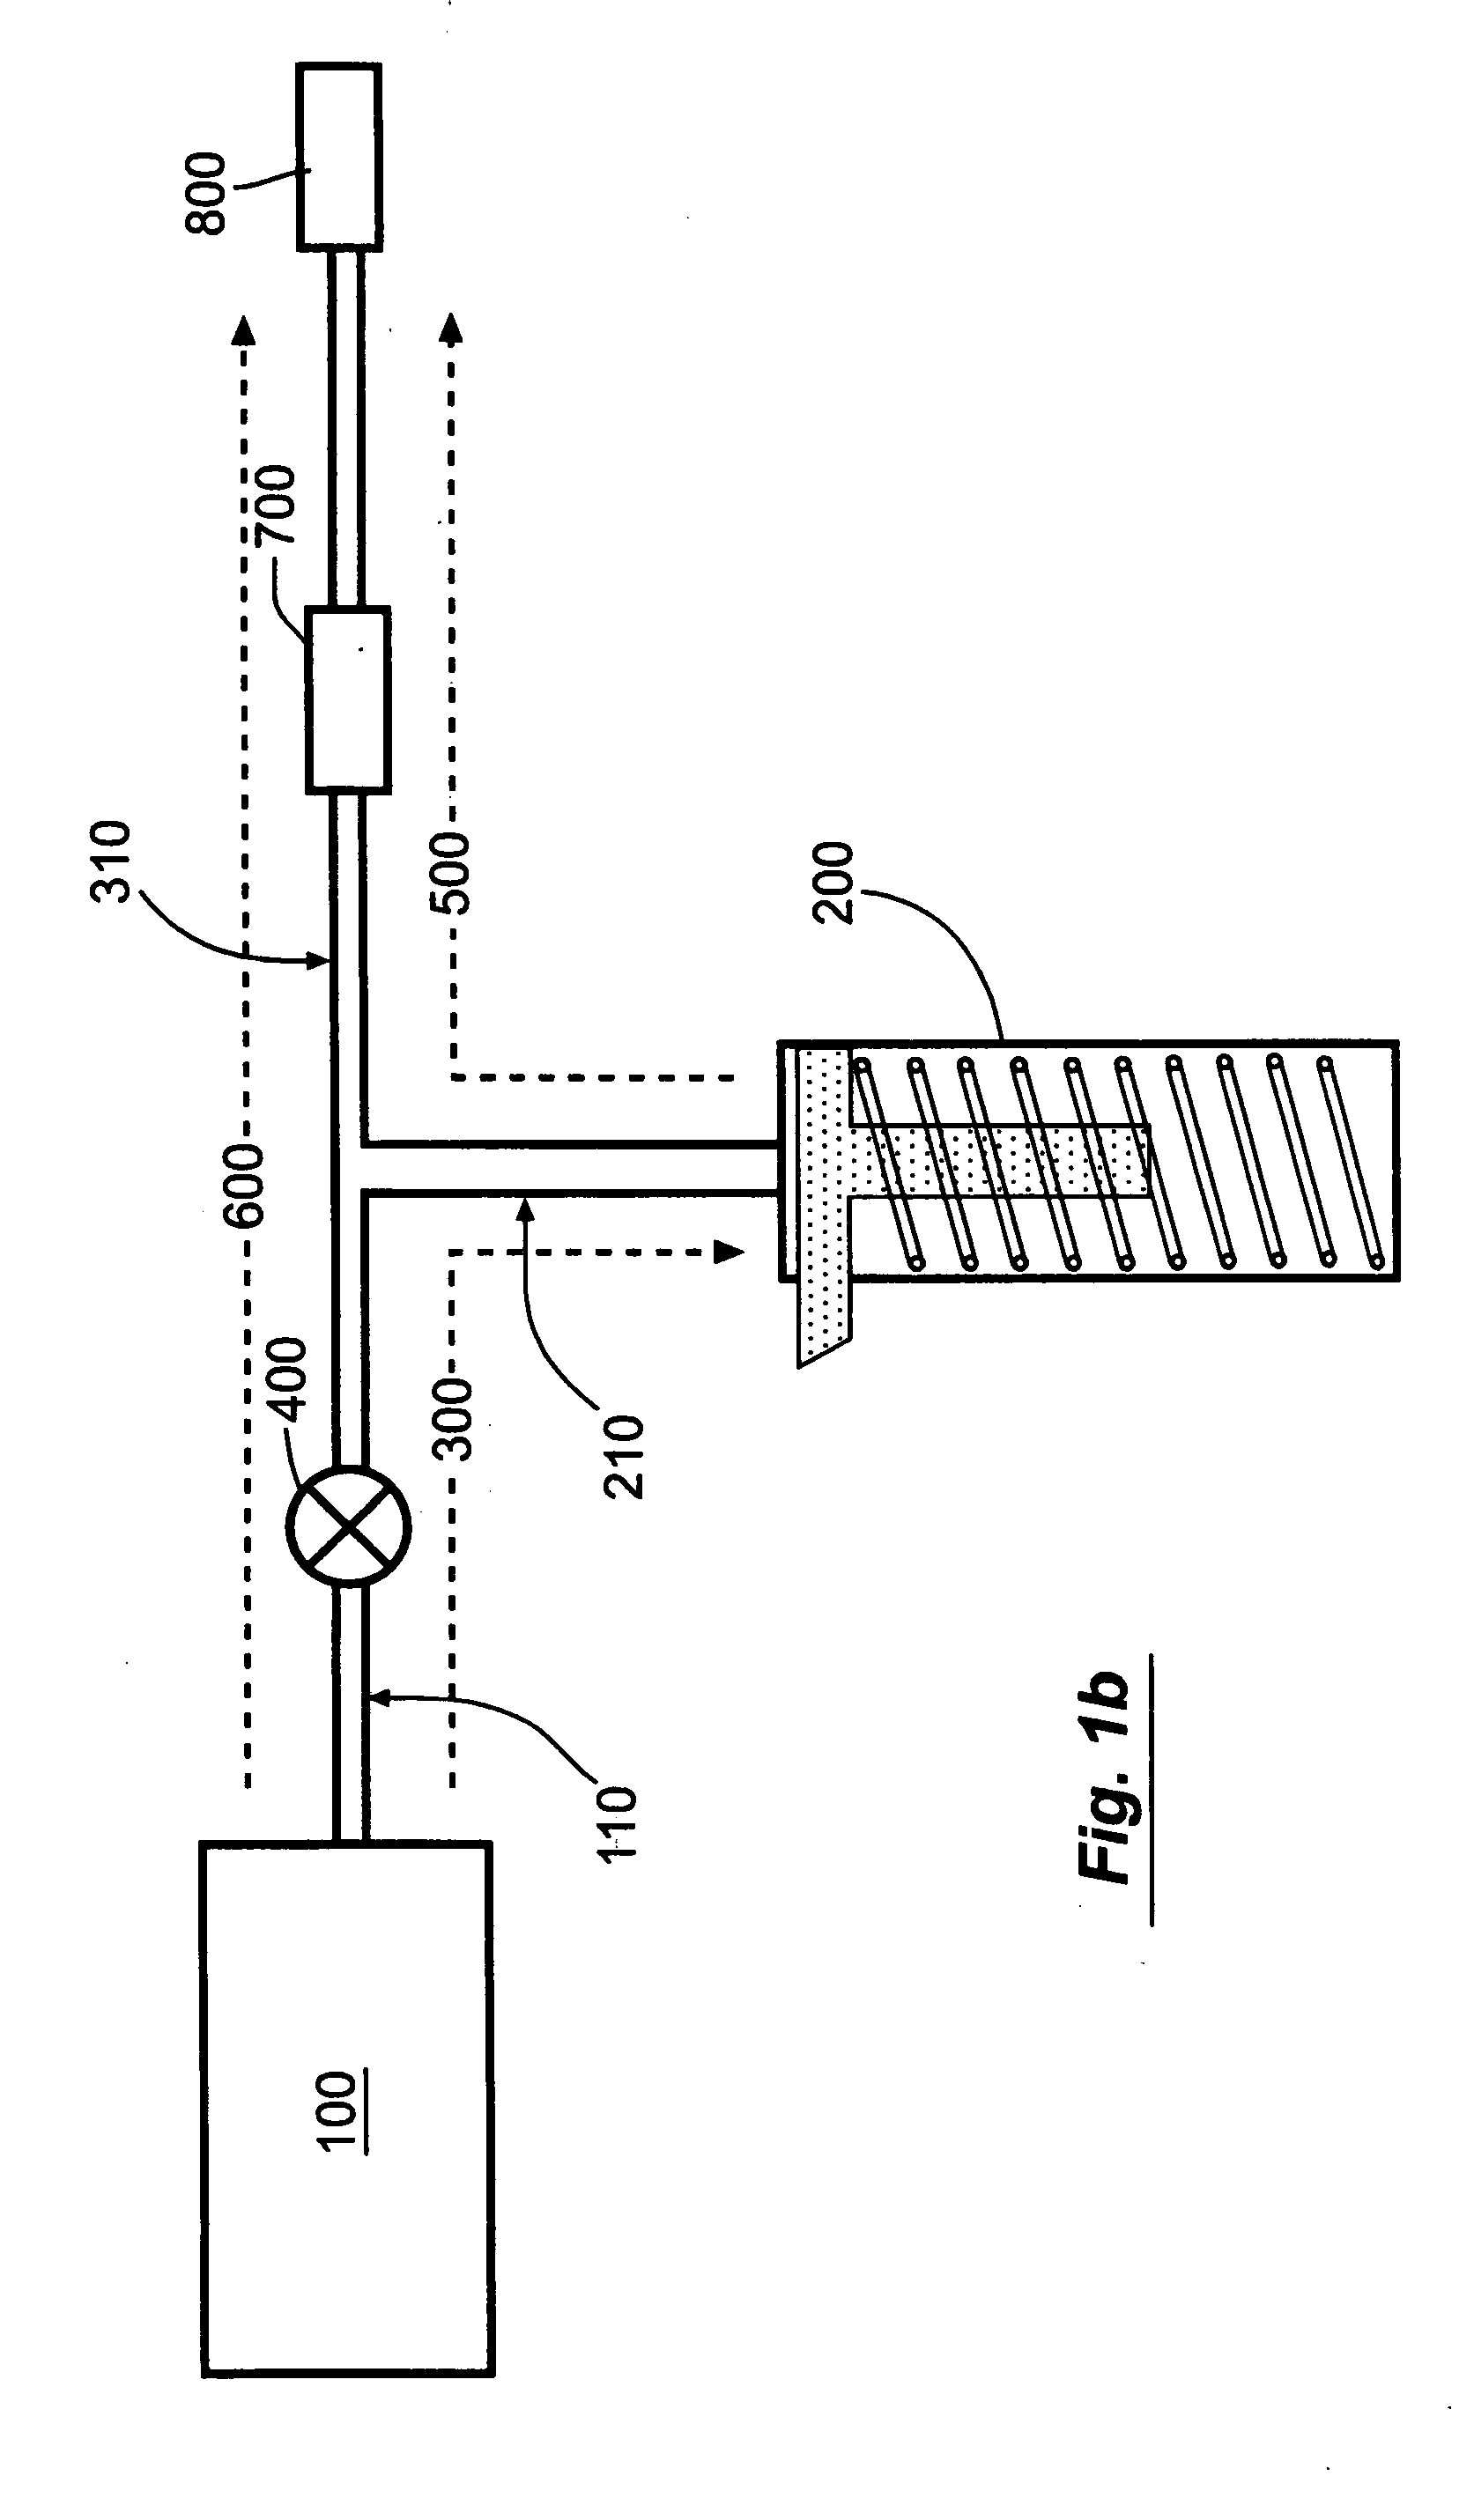 Controlled-volume infusion device